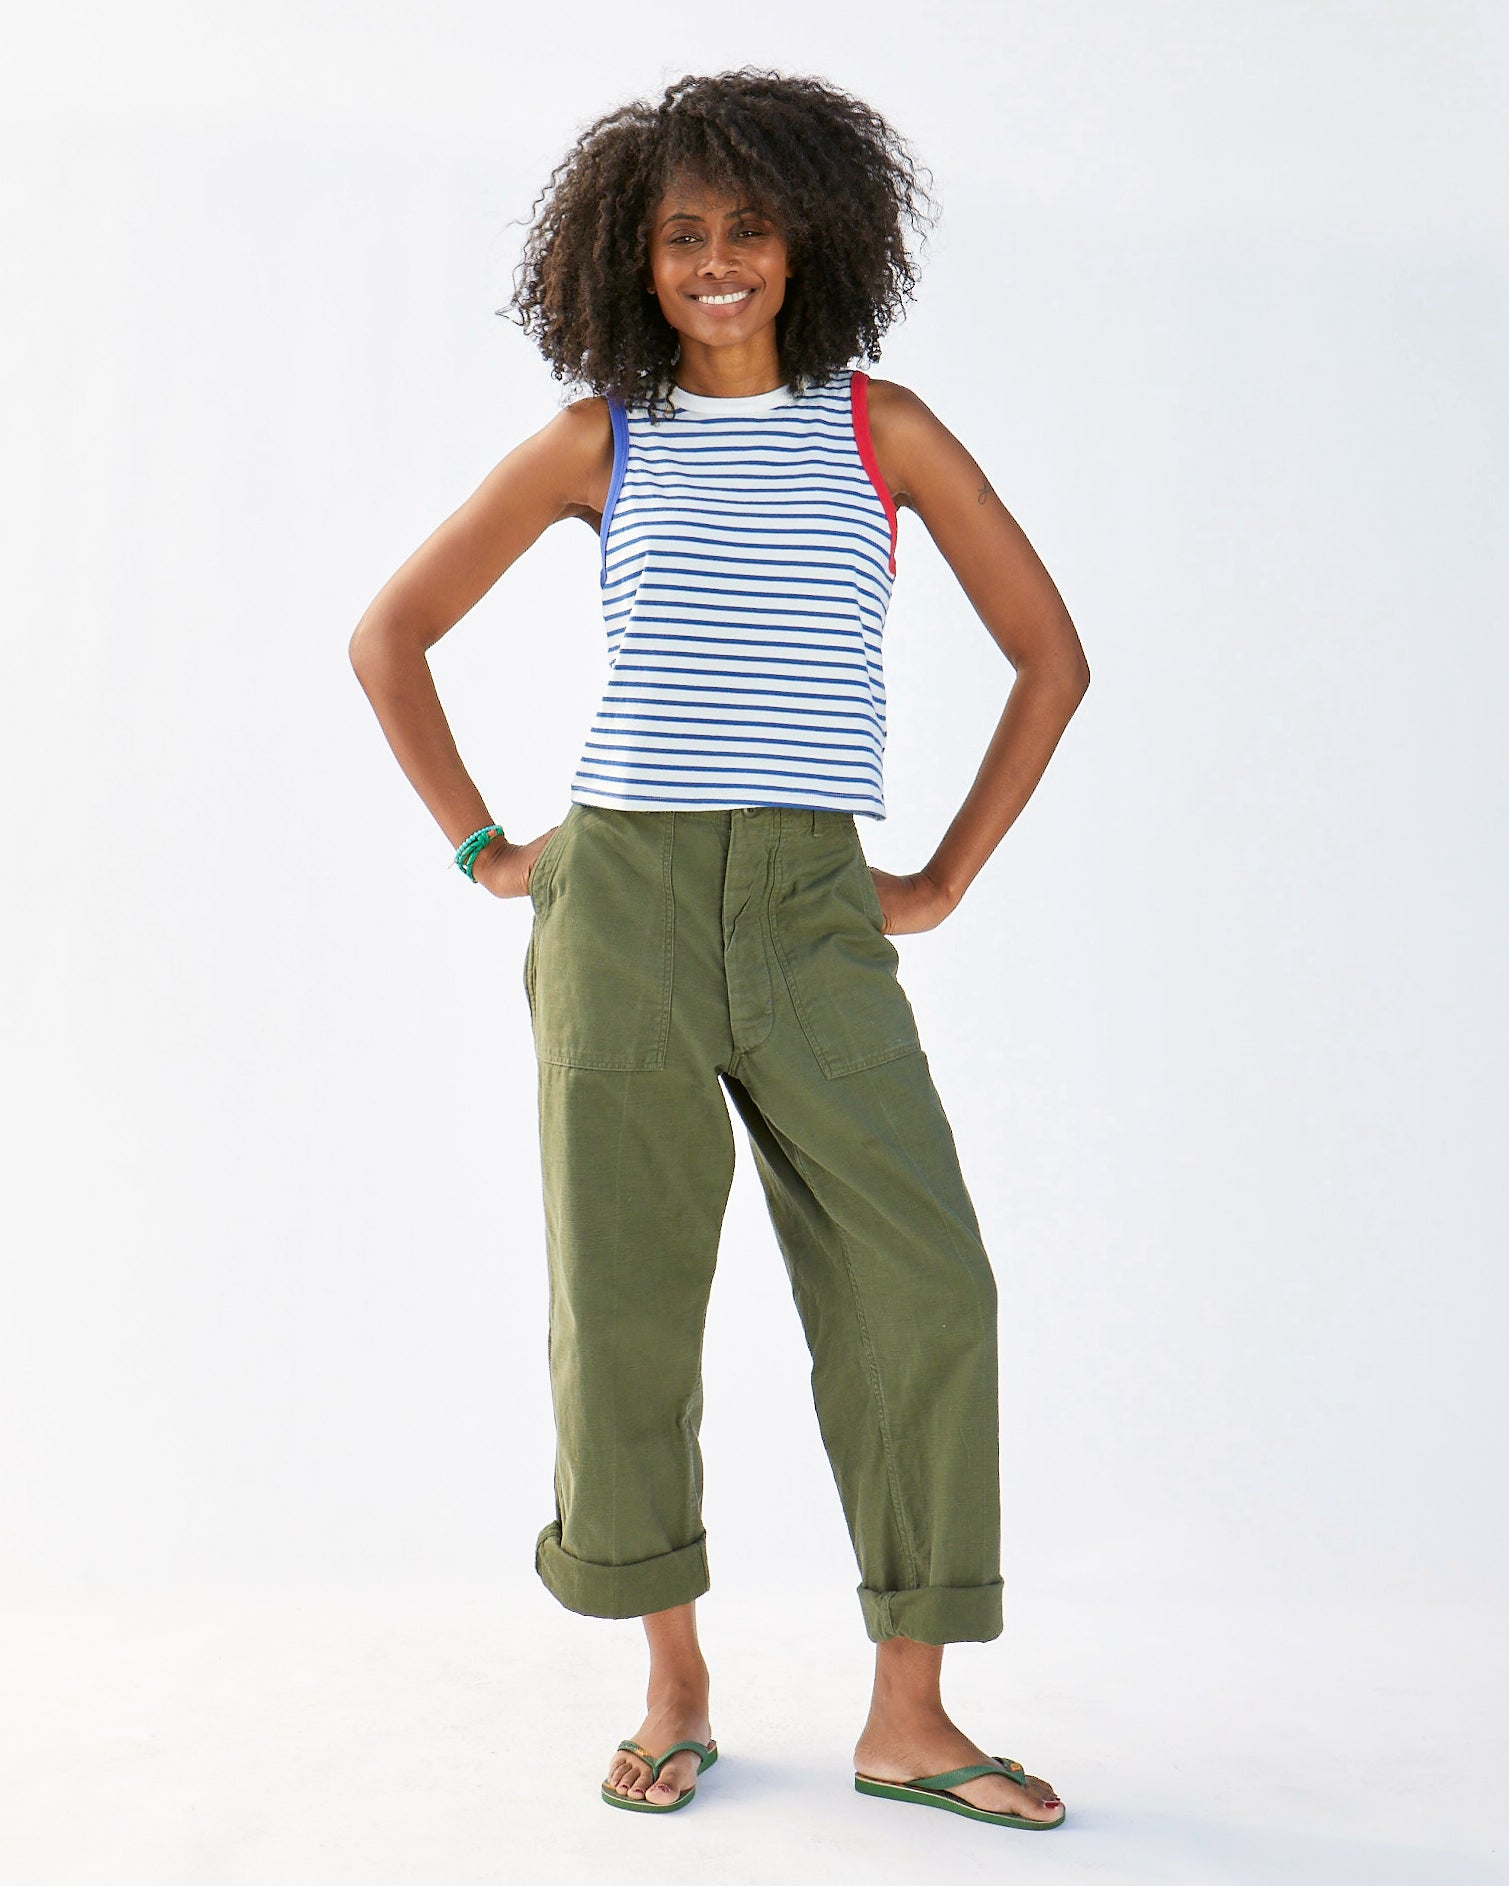 Mecca wearing the Cobalt and Cream Petit Stripe Camp Fit Tank with cargo pants and flip flops